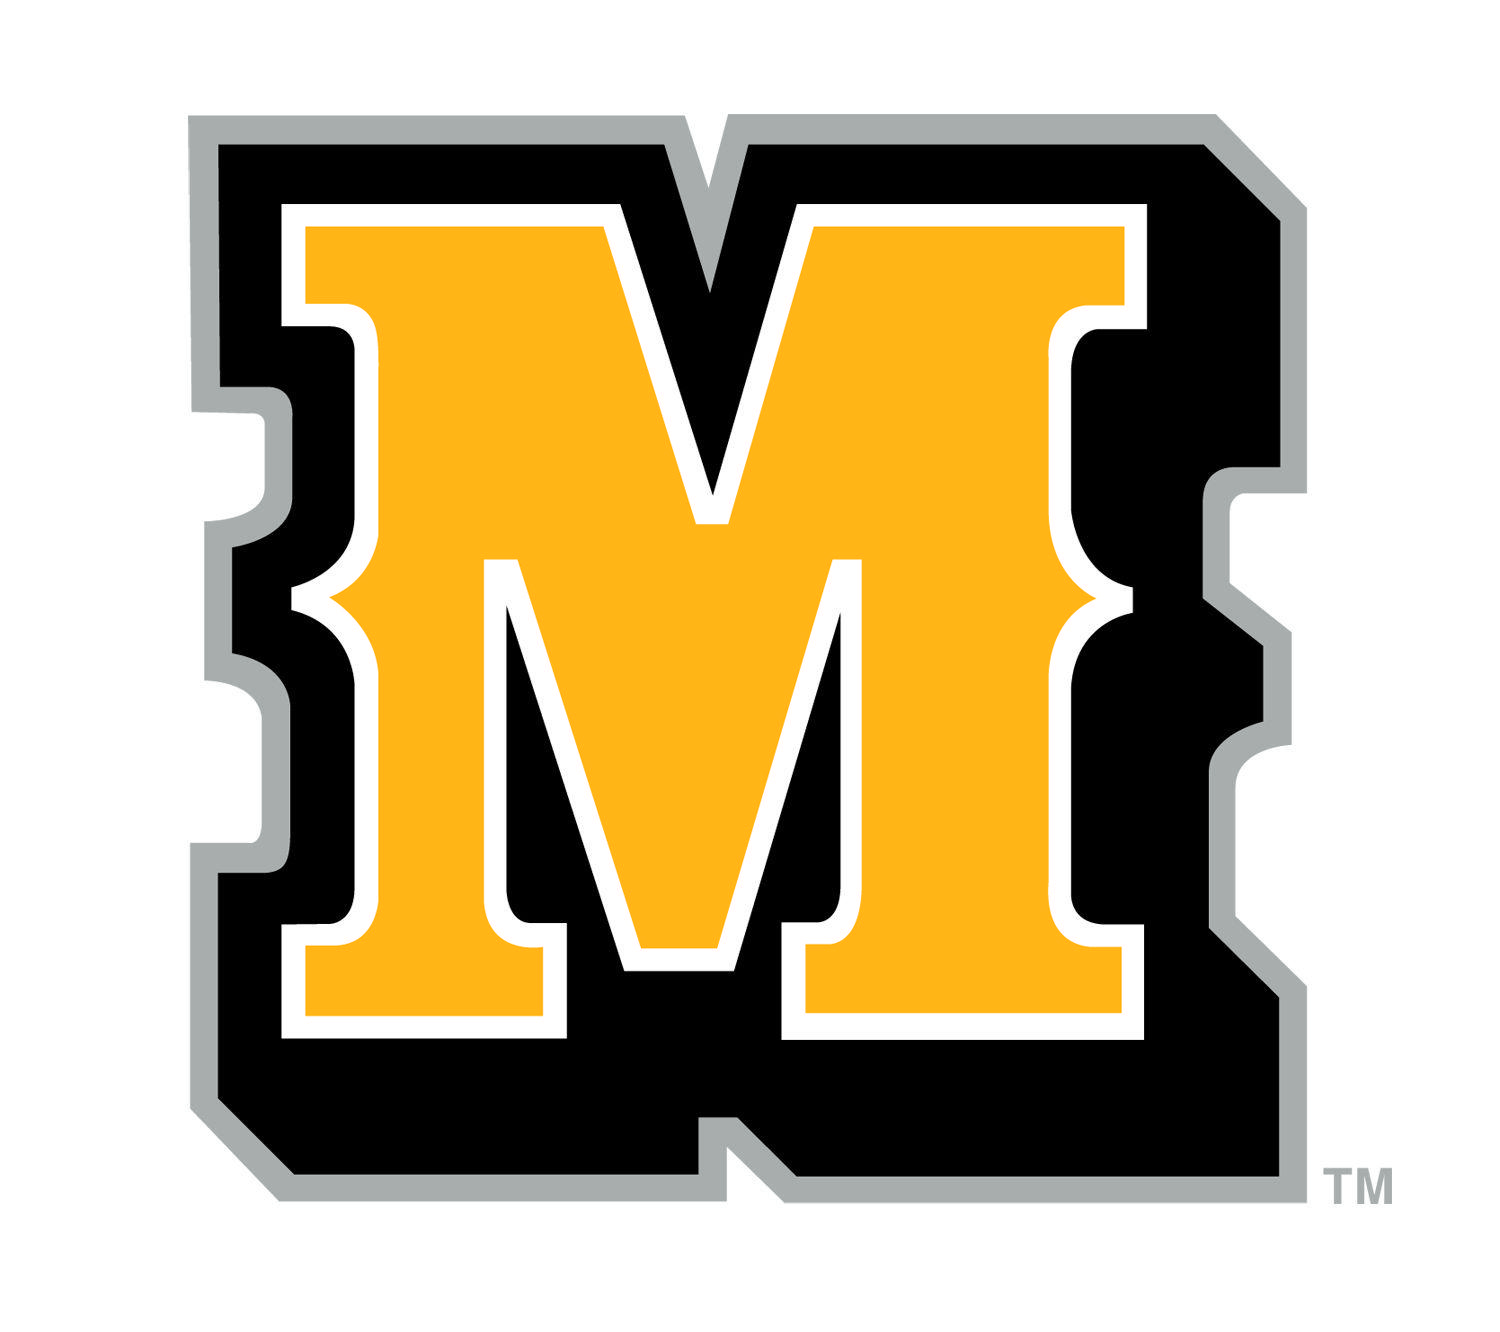 Baseball M Logo - Our New Madisonville Miner Logos Are Here! | Madisonville Miners ...